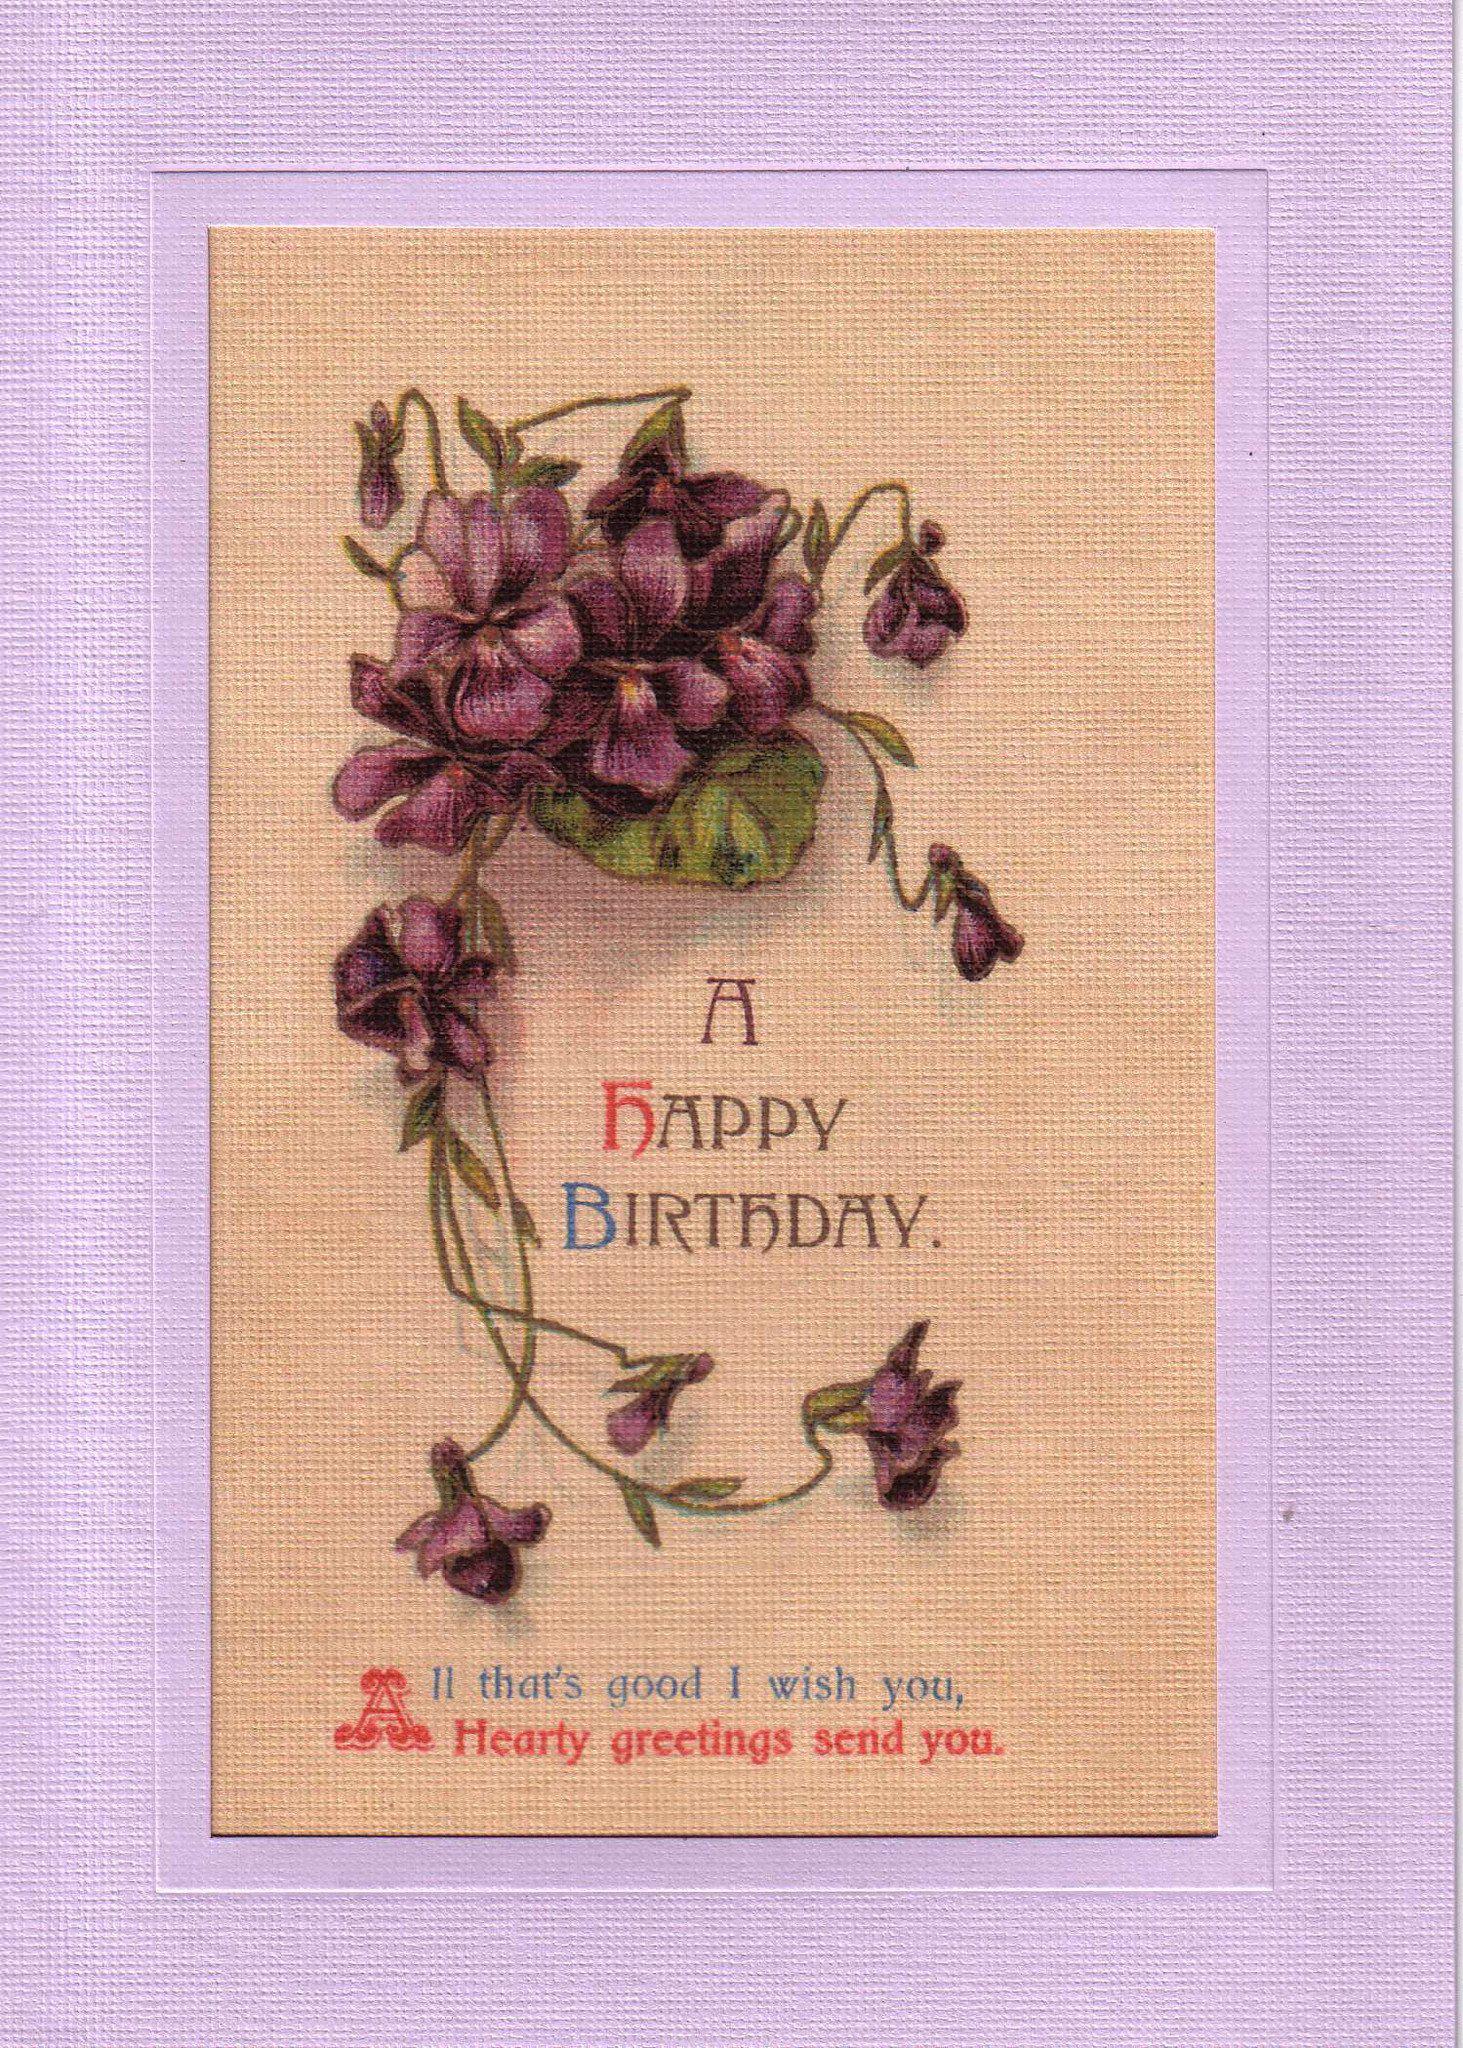 Happy Birthday-Greetings from the Past-Plymouth Cards